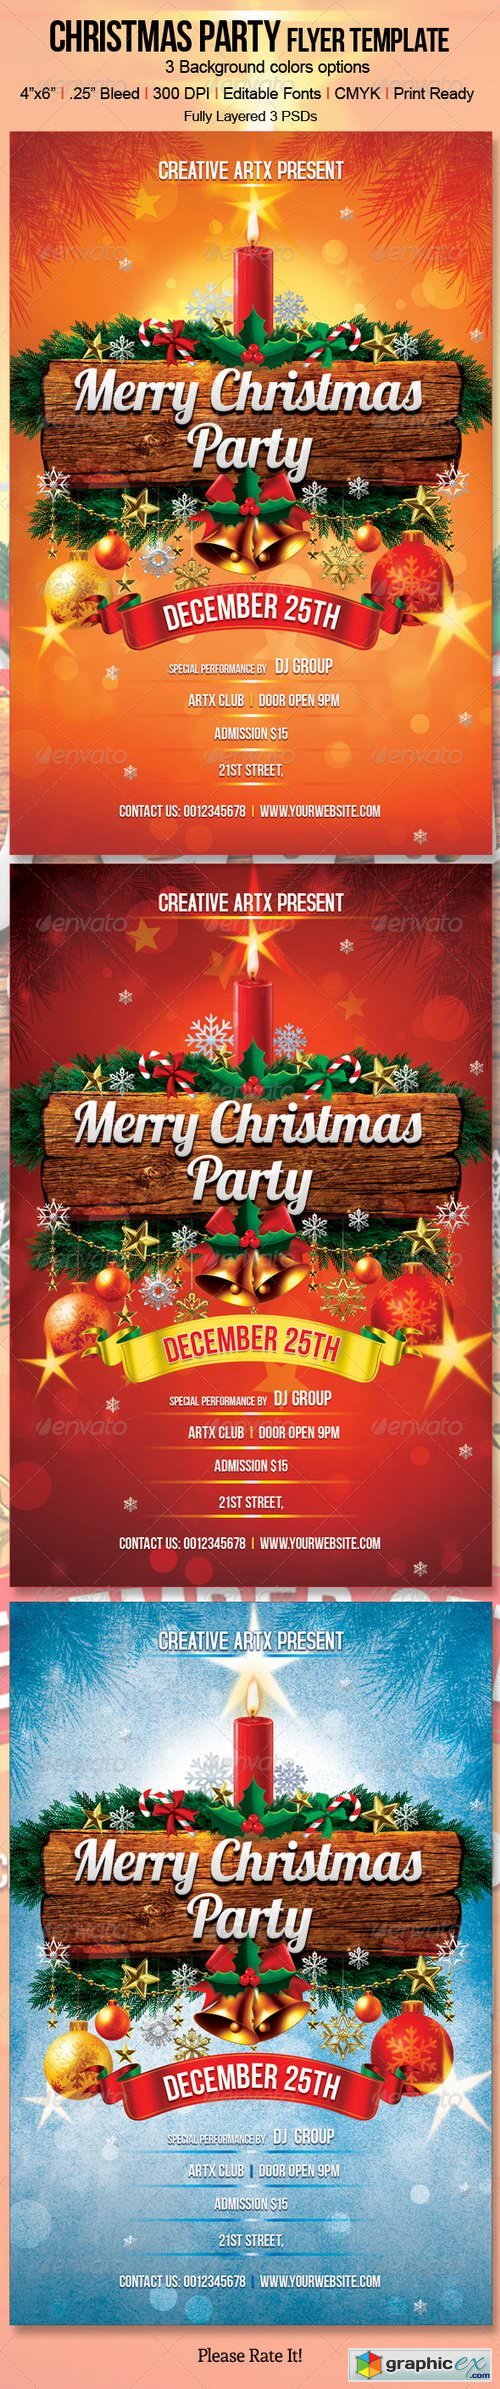 Christmas Party Flyer Template 3332518